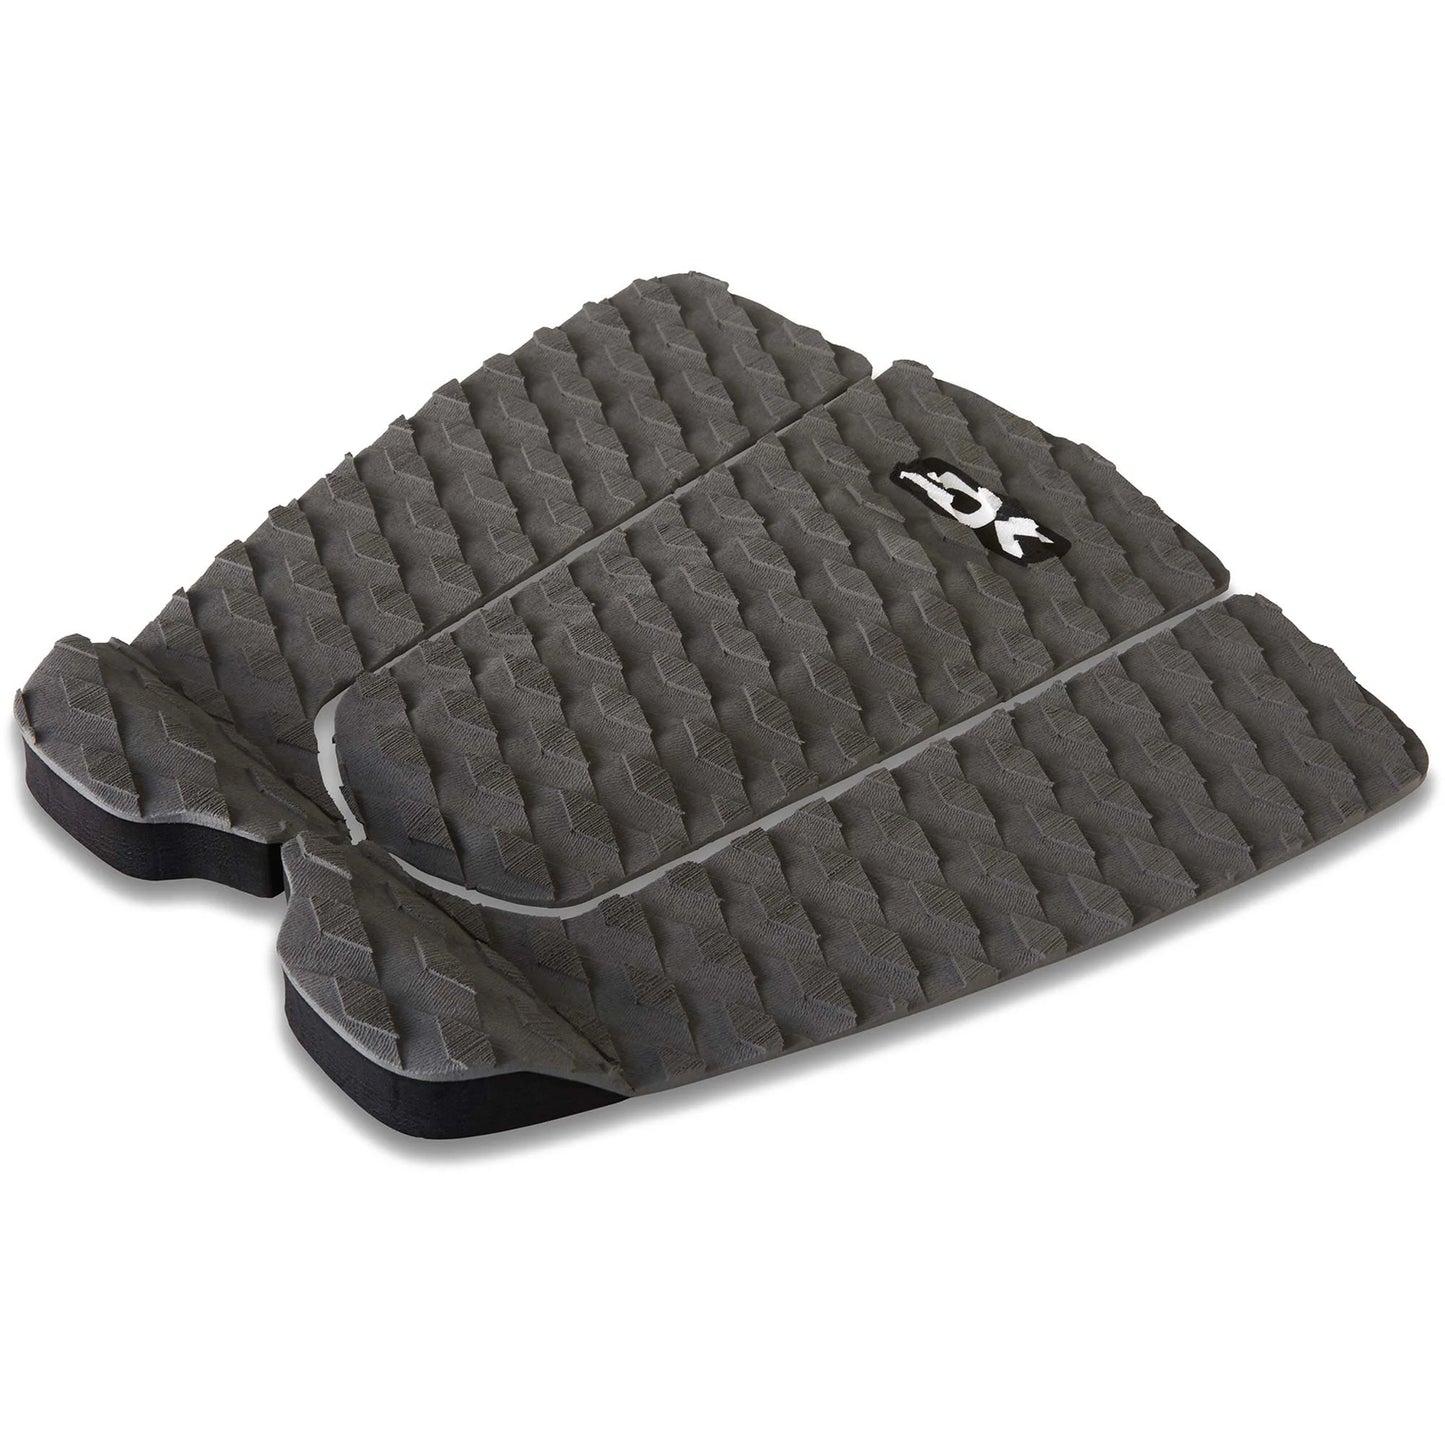 Andy Irons Pro Surf Traction Pad - Various Colors